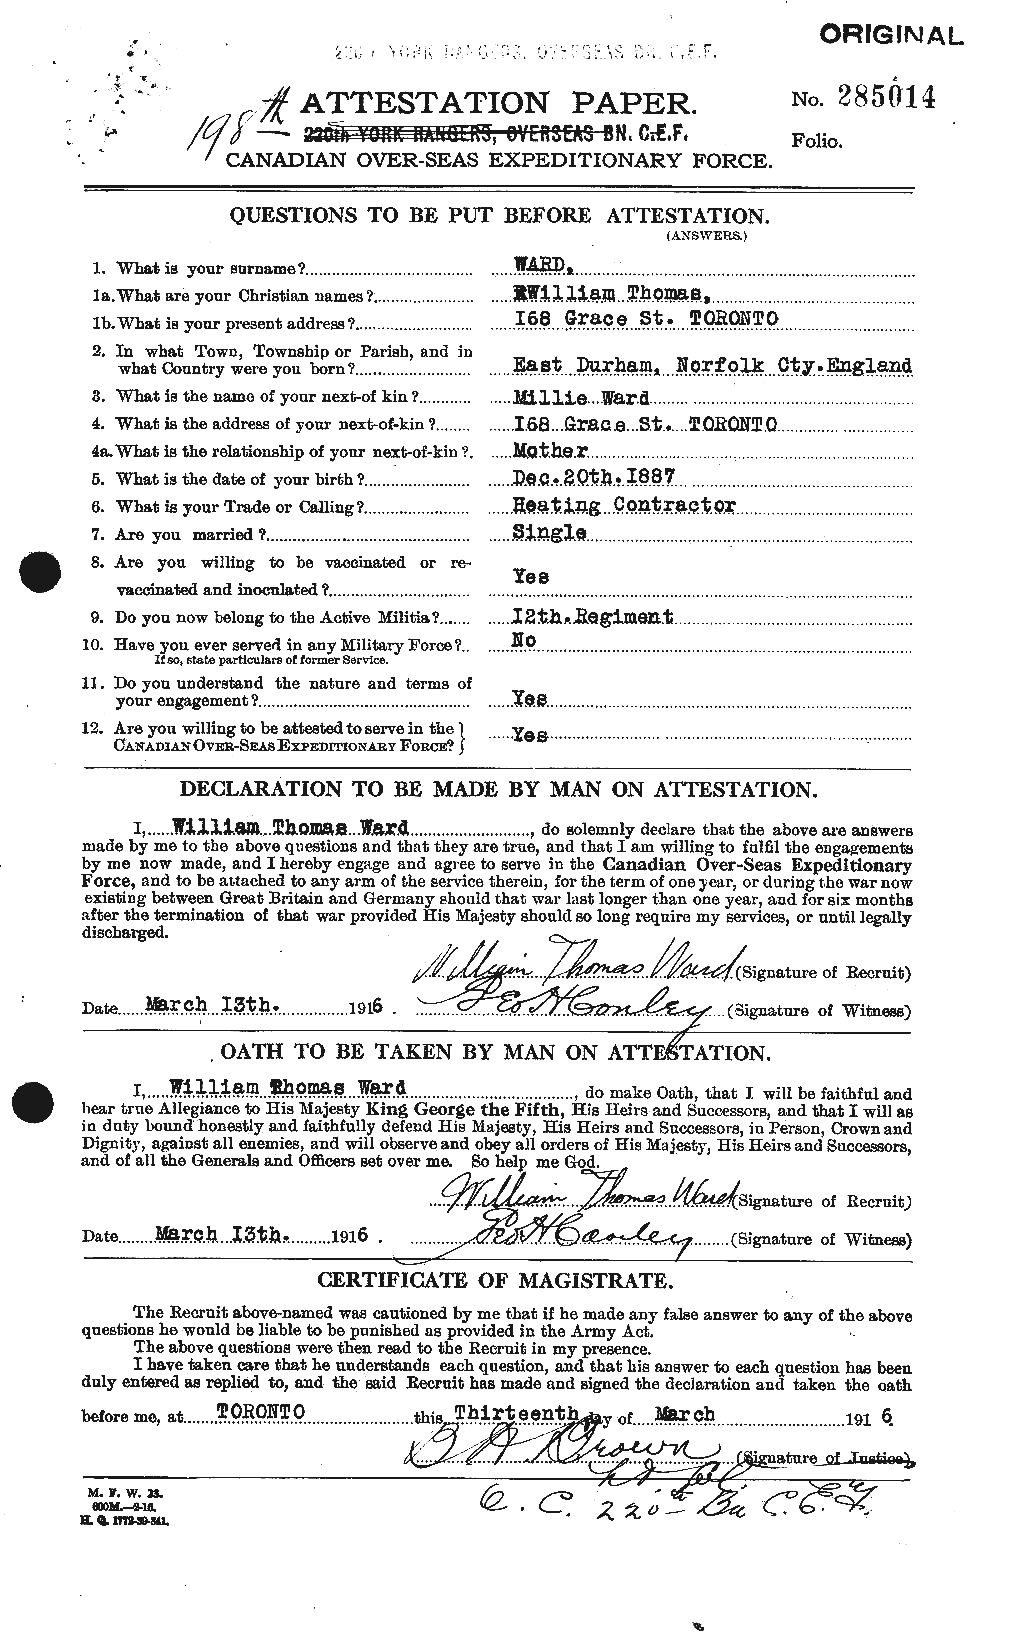 Personnel Records of the First World War - CEF 659840a